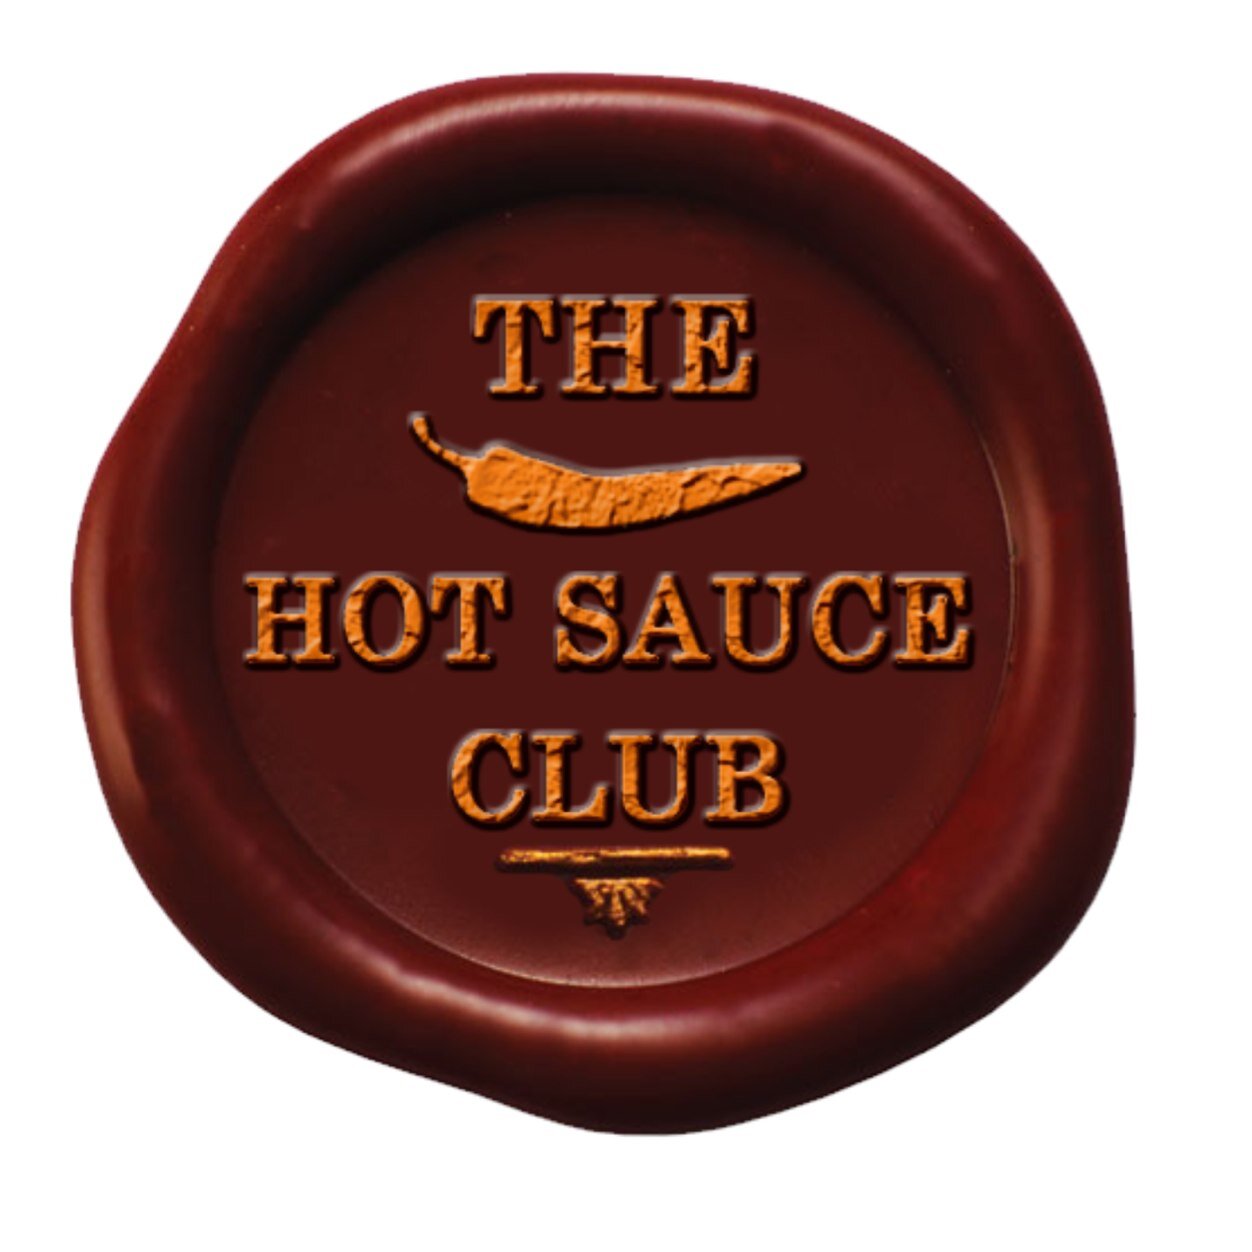 The world’s fastest growing hot sauce community. We’re also building the ultimate online hot sauce store - http://t.co/zyNttvD3lp